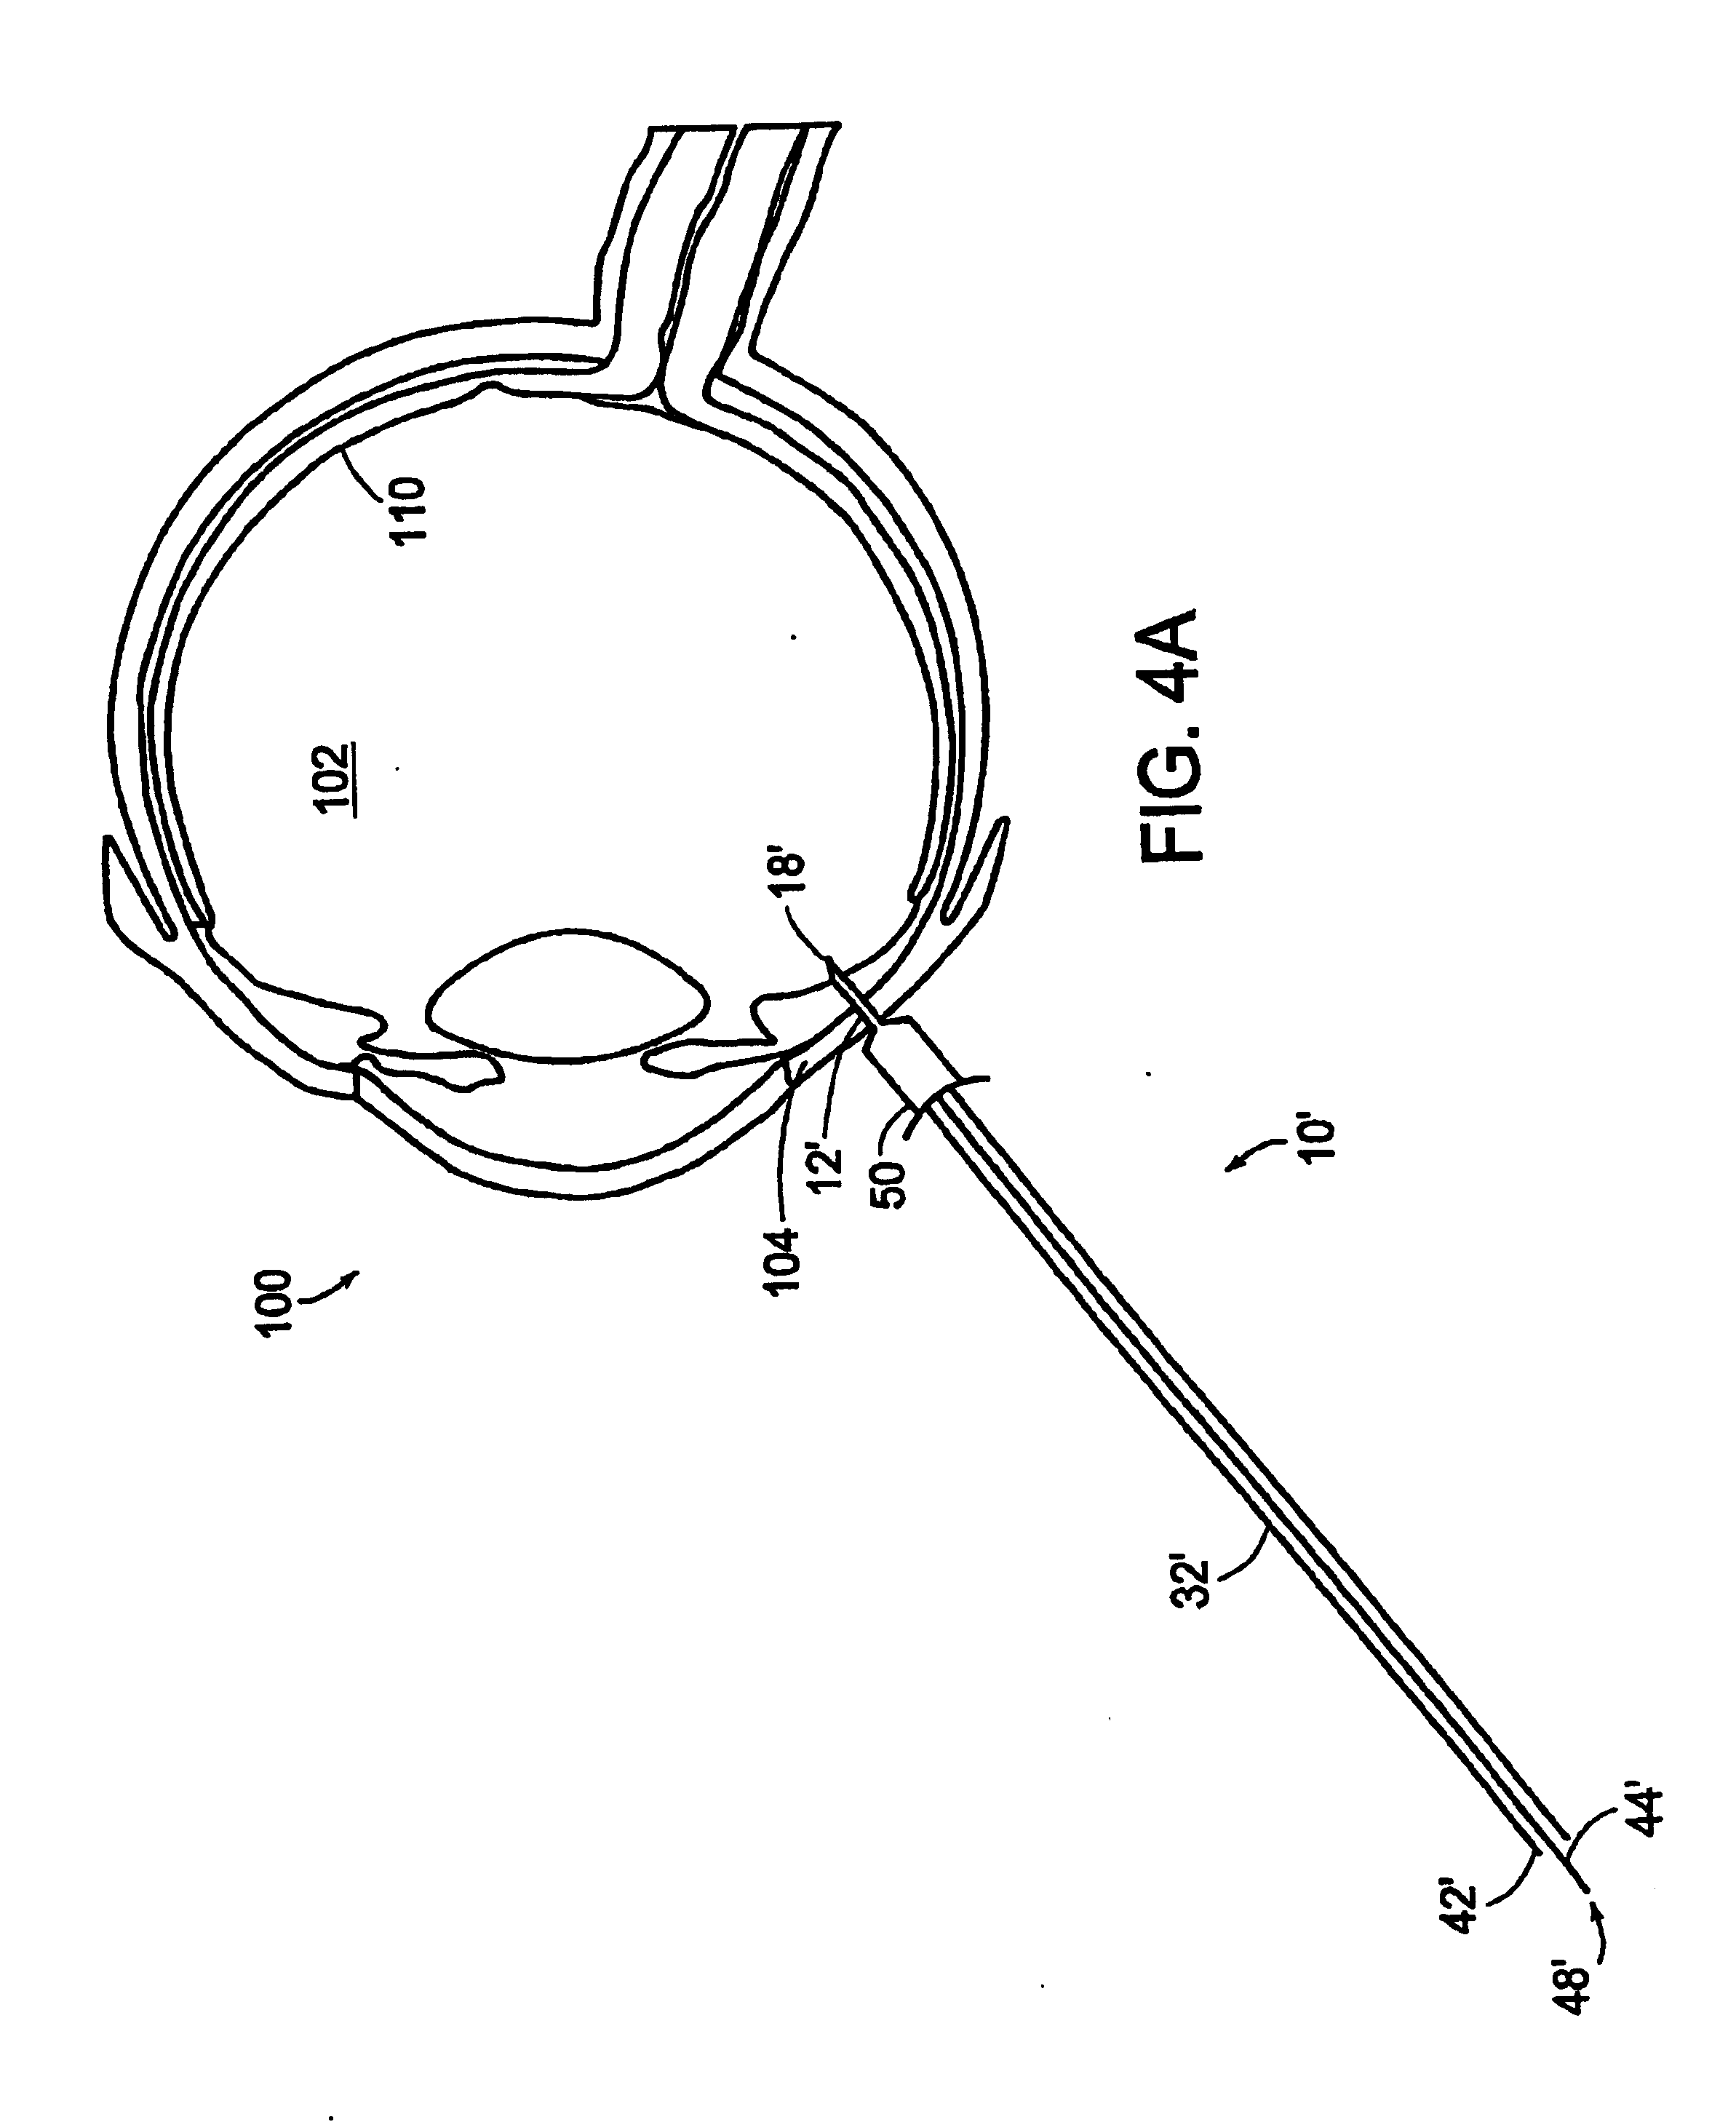 Method for subretinal administration of therapeutics including steroids; method for localizing pharmacodynamic action at the choroid of the retina; and related methods for treatment and/or prevention of retinal diseases